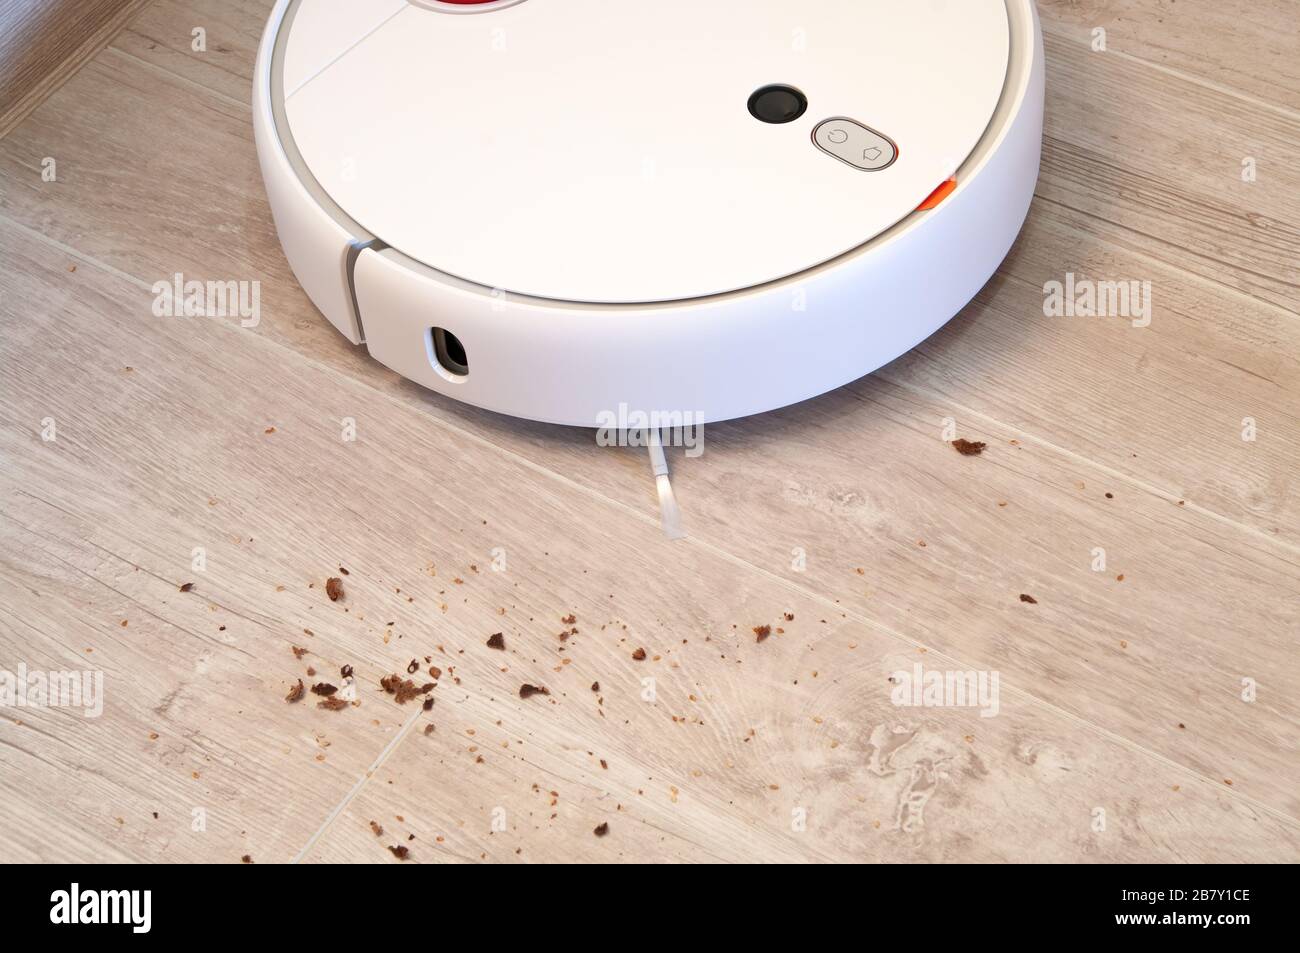 Robotic vacuum cleaner removes breadcrumbs from the laminate wood floor. Smart cleaning technology. Stock Photo